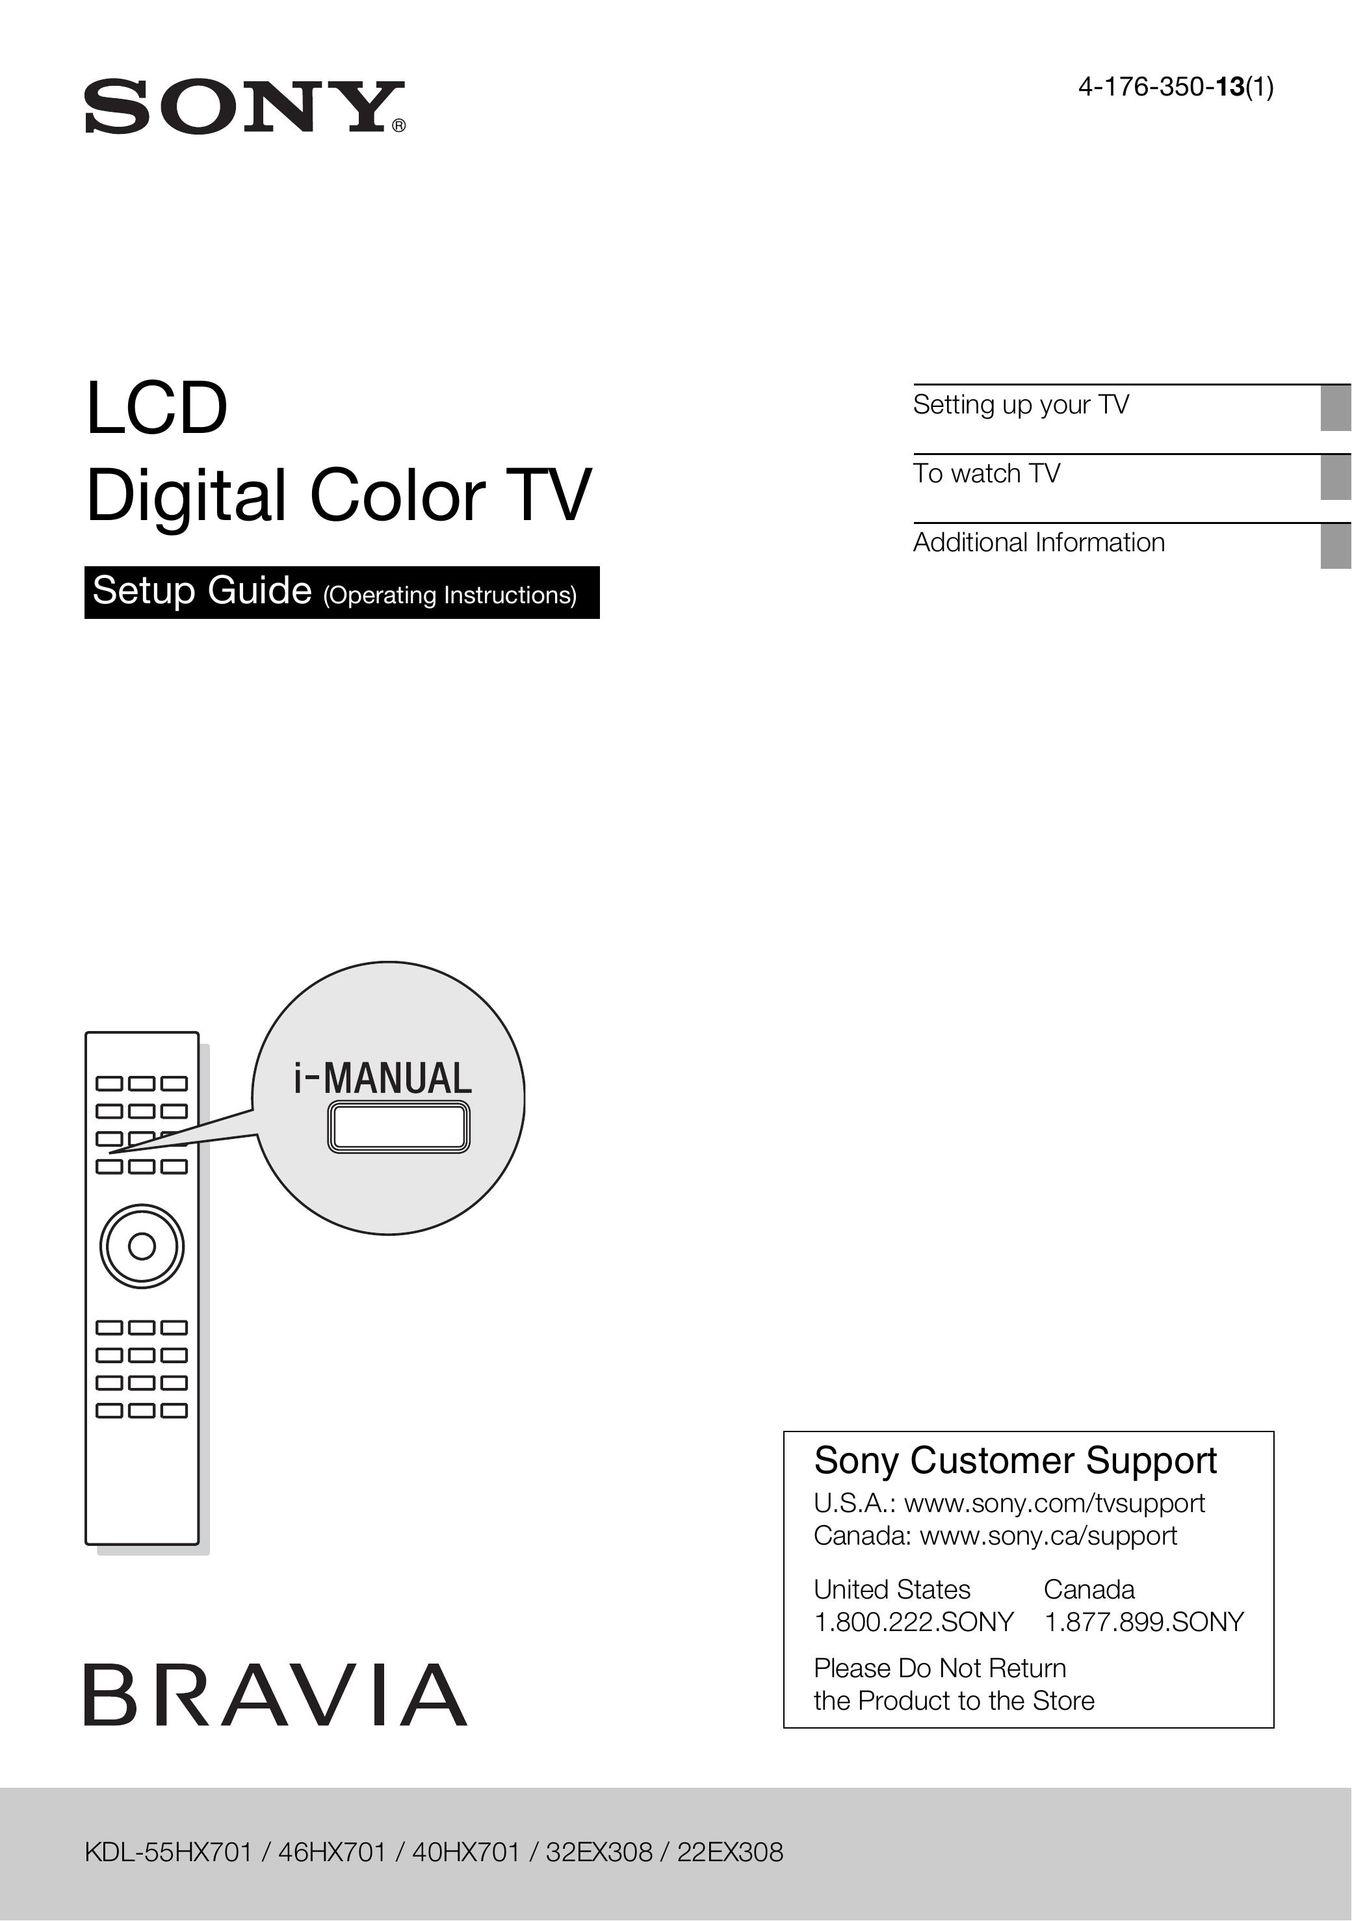 Sony 22EX308 CRT Television User Manual